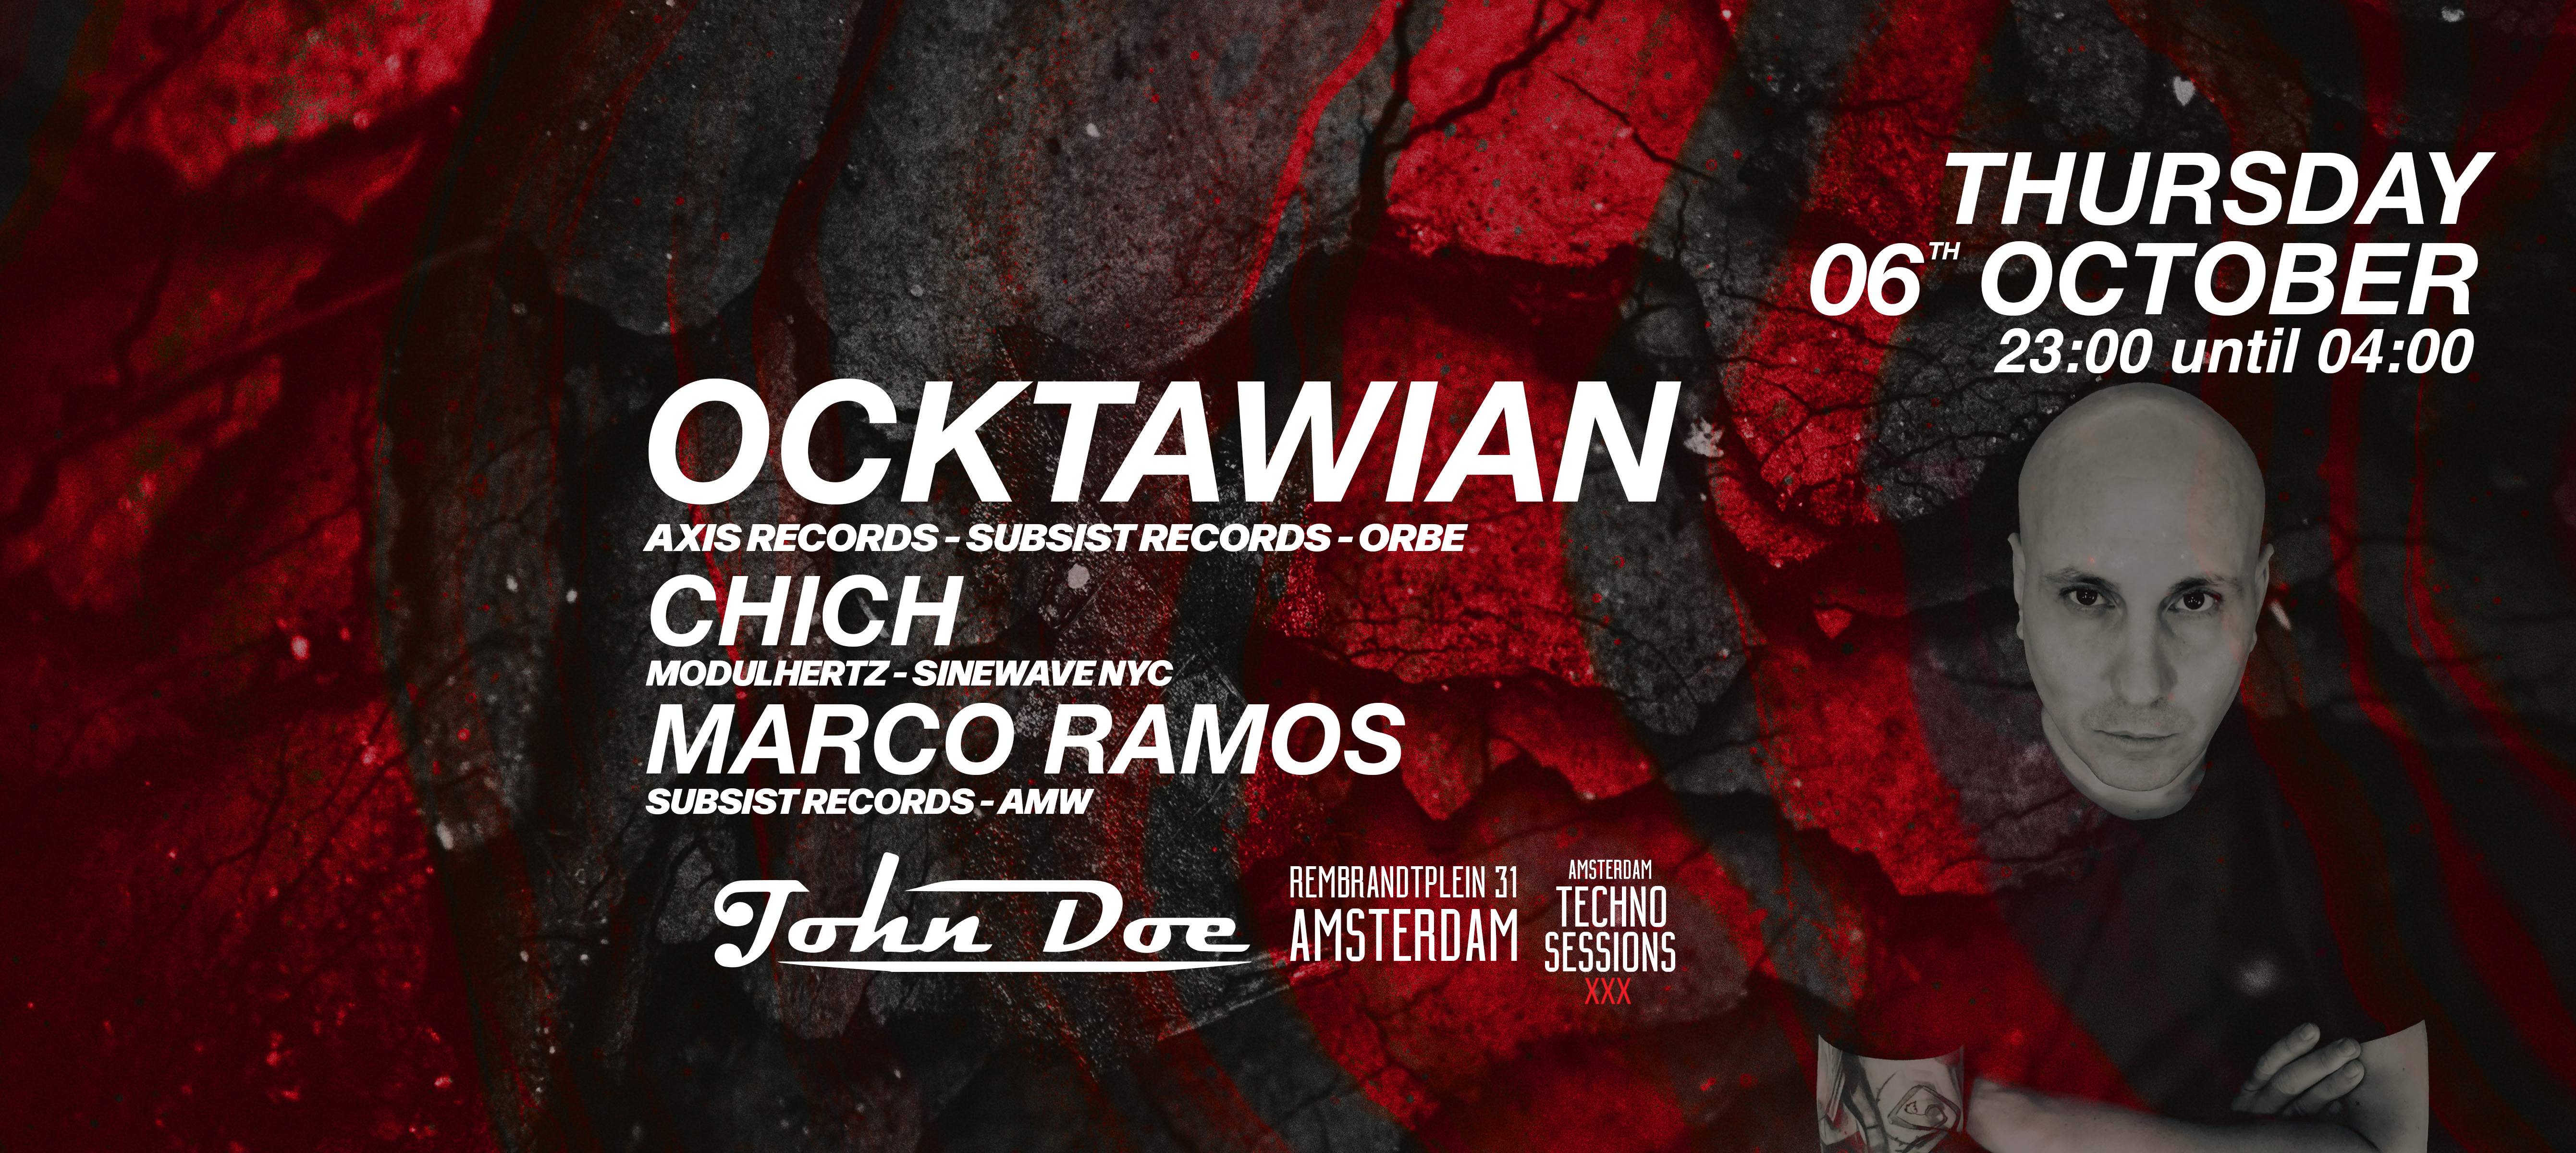 Amsterdam Techno Sessions with Ocktawian (Axis Records, Subsist, Orbe / ES) - Página trasera